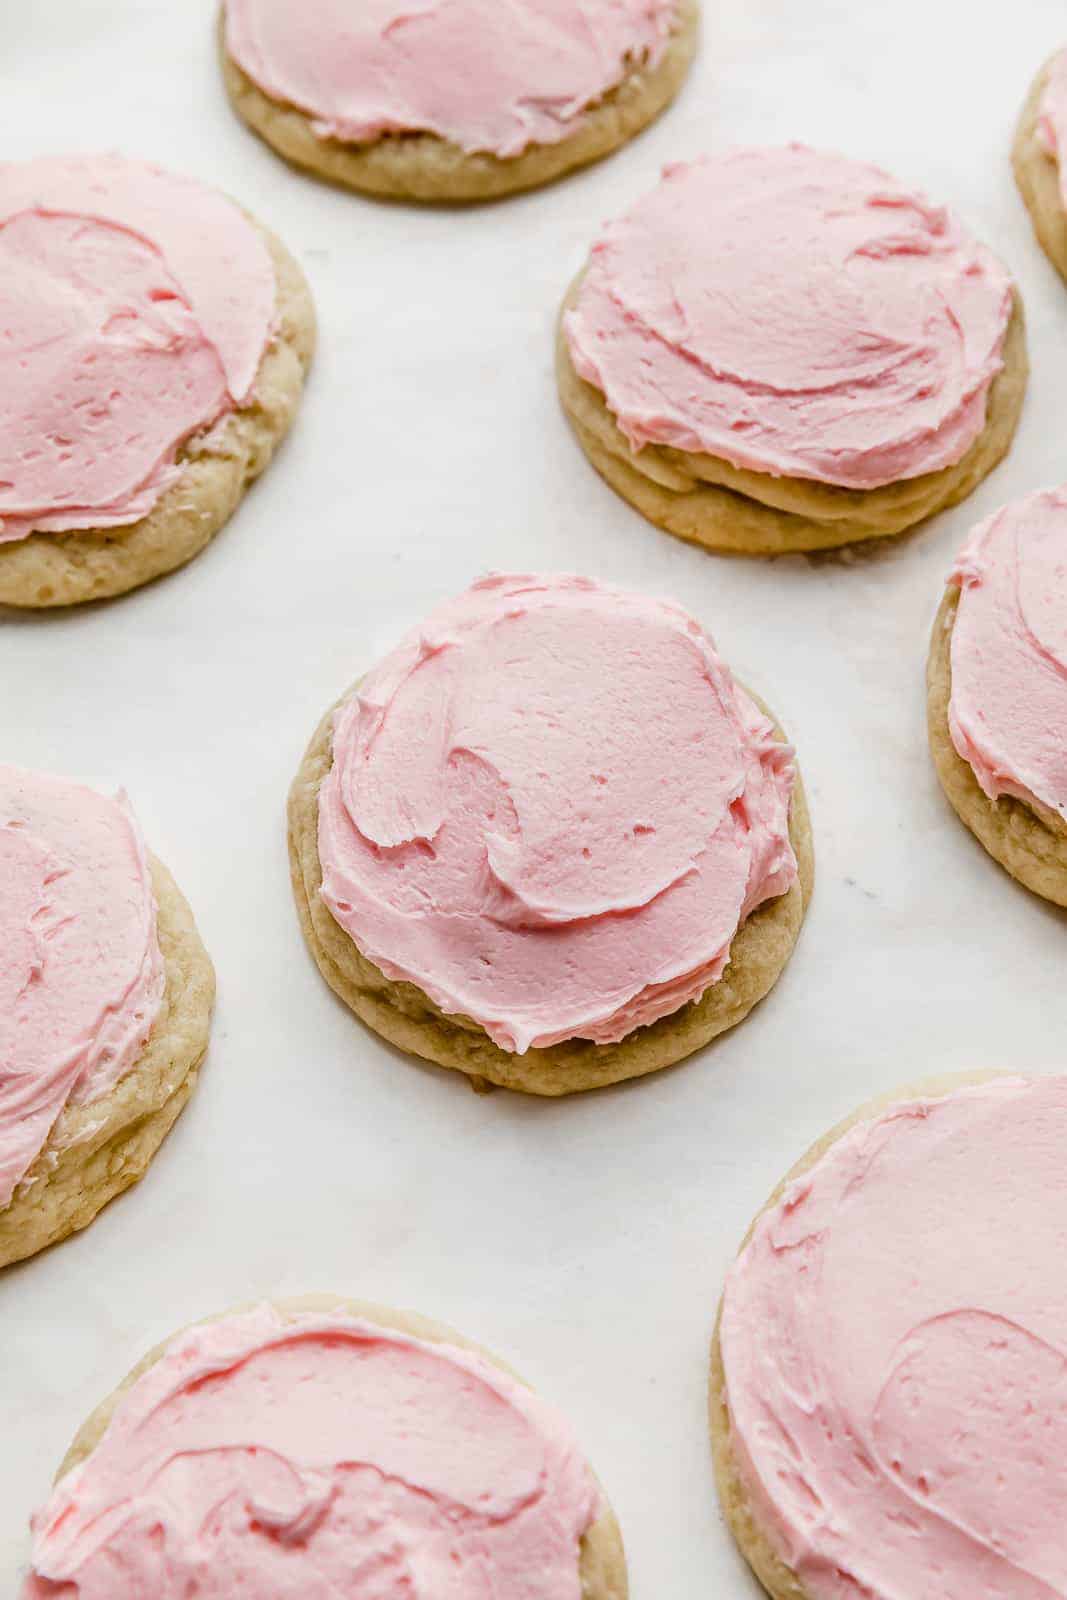 A Copycat crumbl sugar cookie topped with pink frosting on a white background.